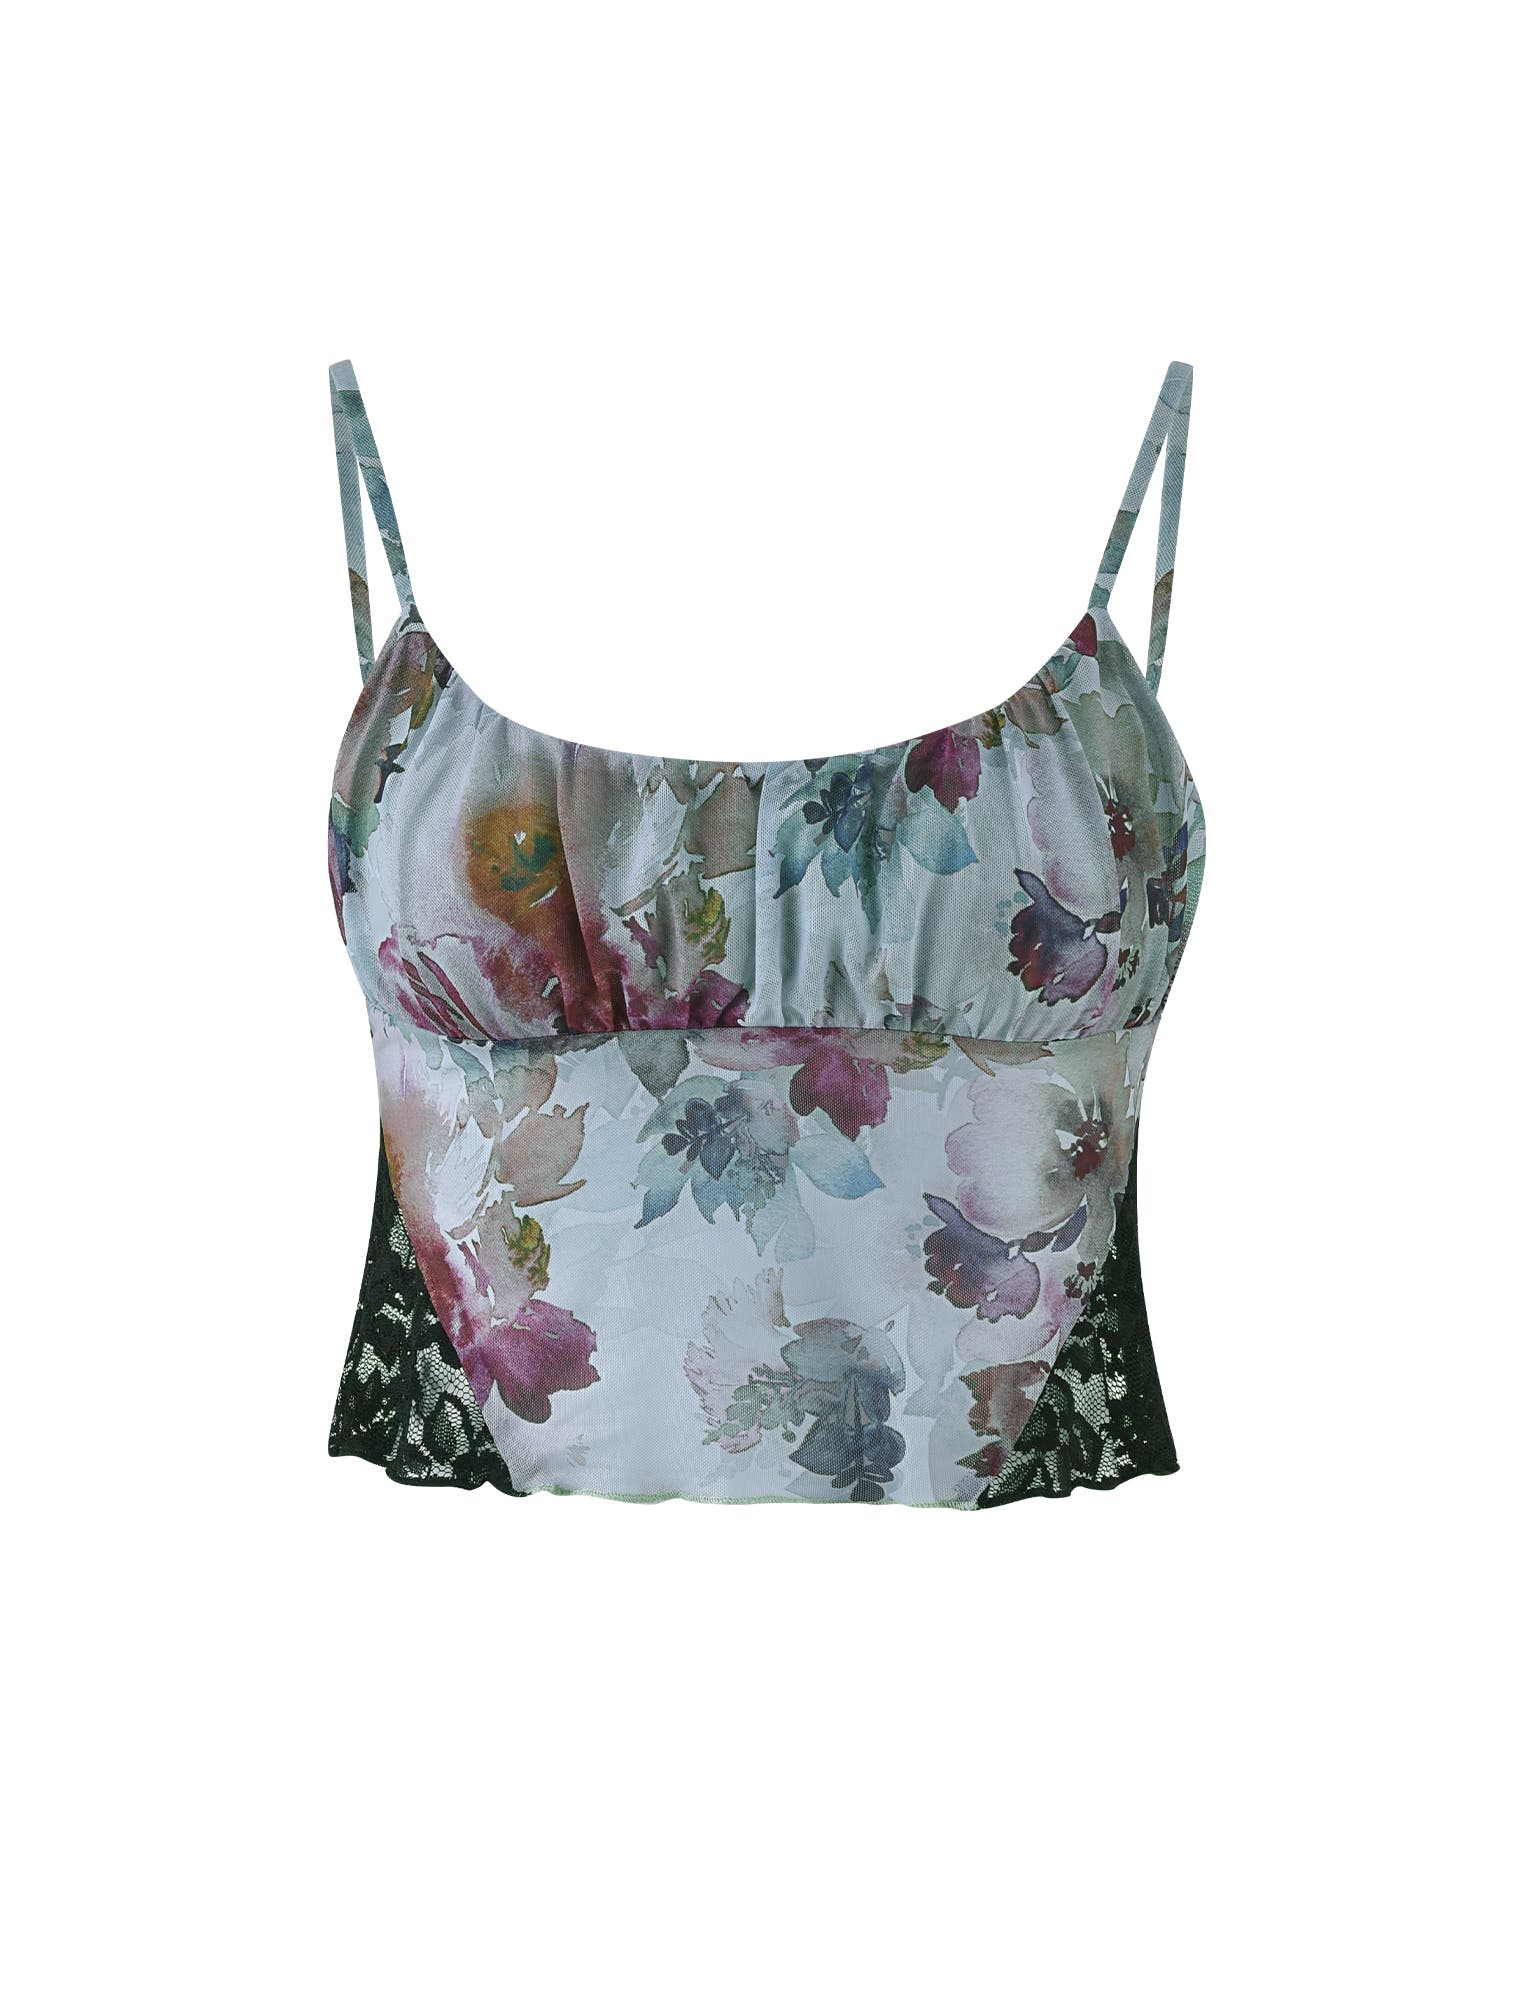 LUTESSA TOP - GREEN : FLORAL : FADED ROSE – Tiger Mist Rest of World